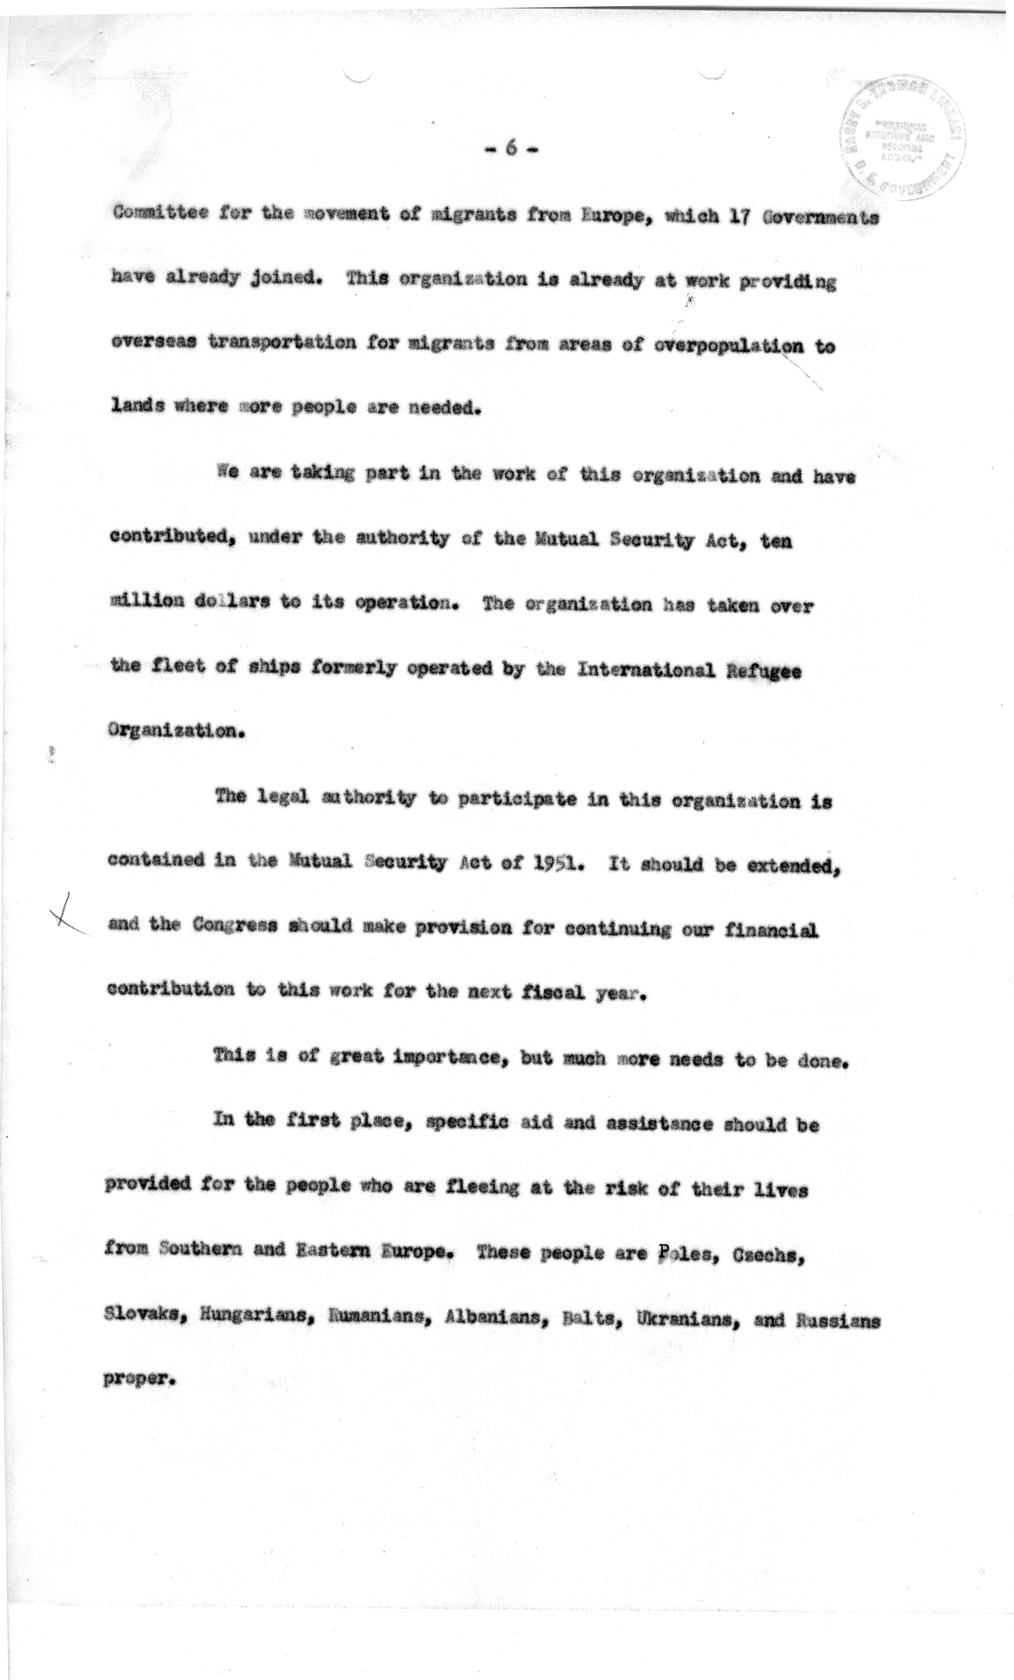 Memorandum from Carlile Bolton-Smith To Richard Neustadt, with Attached Draft of Message